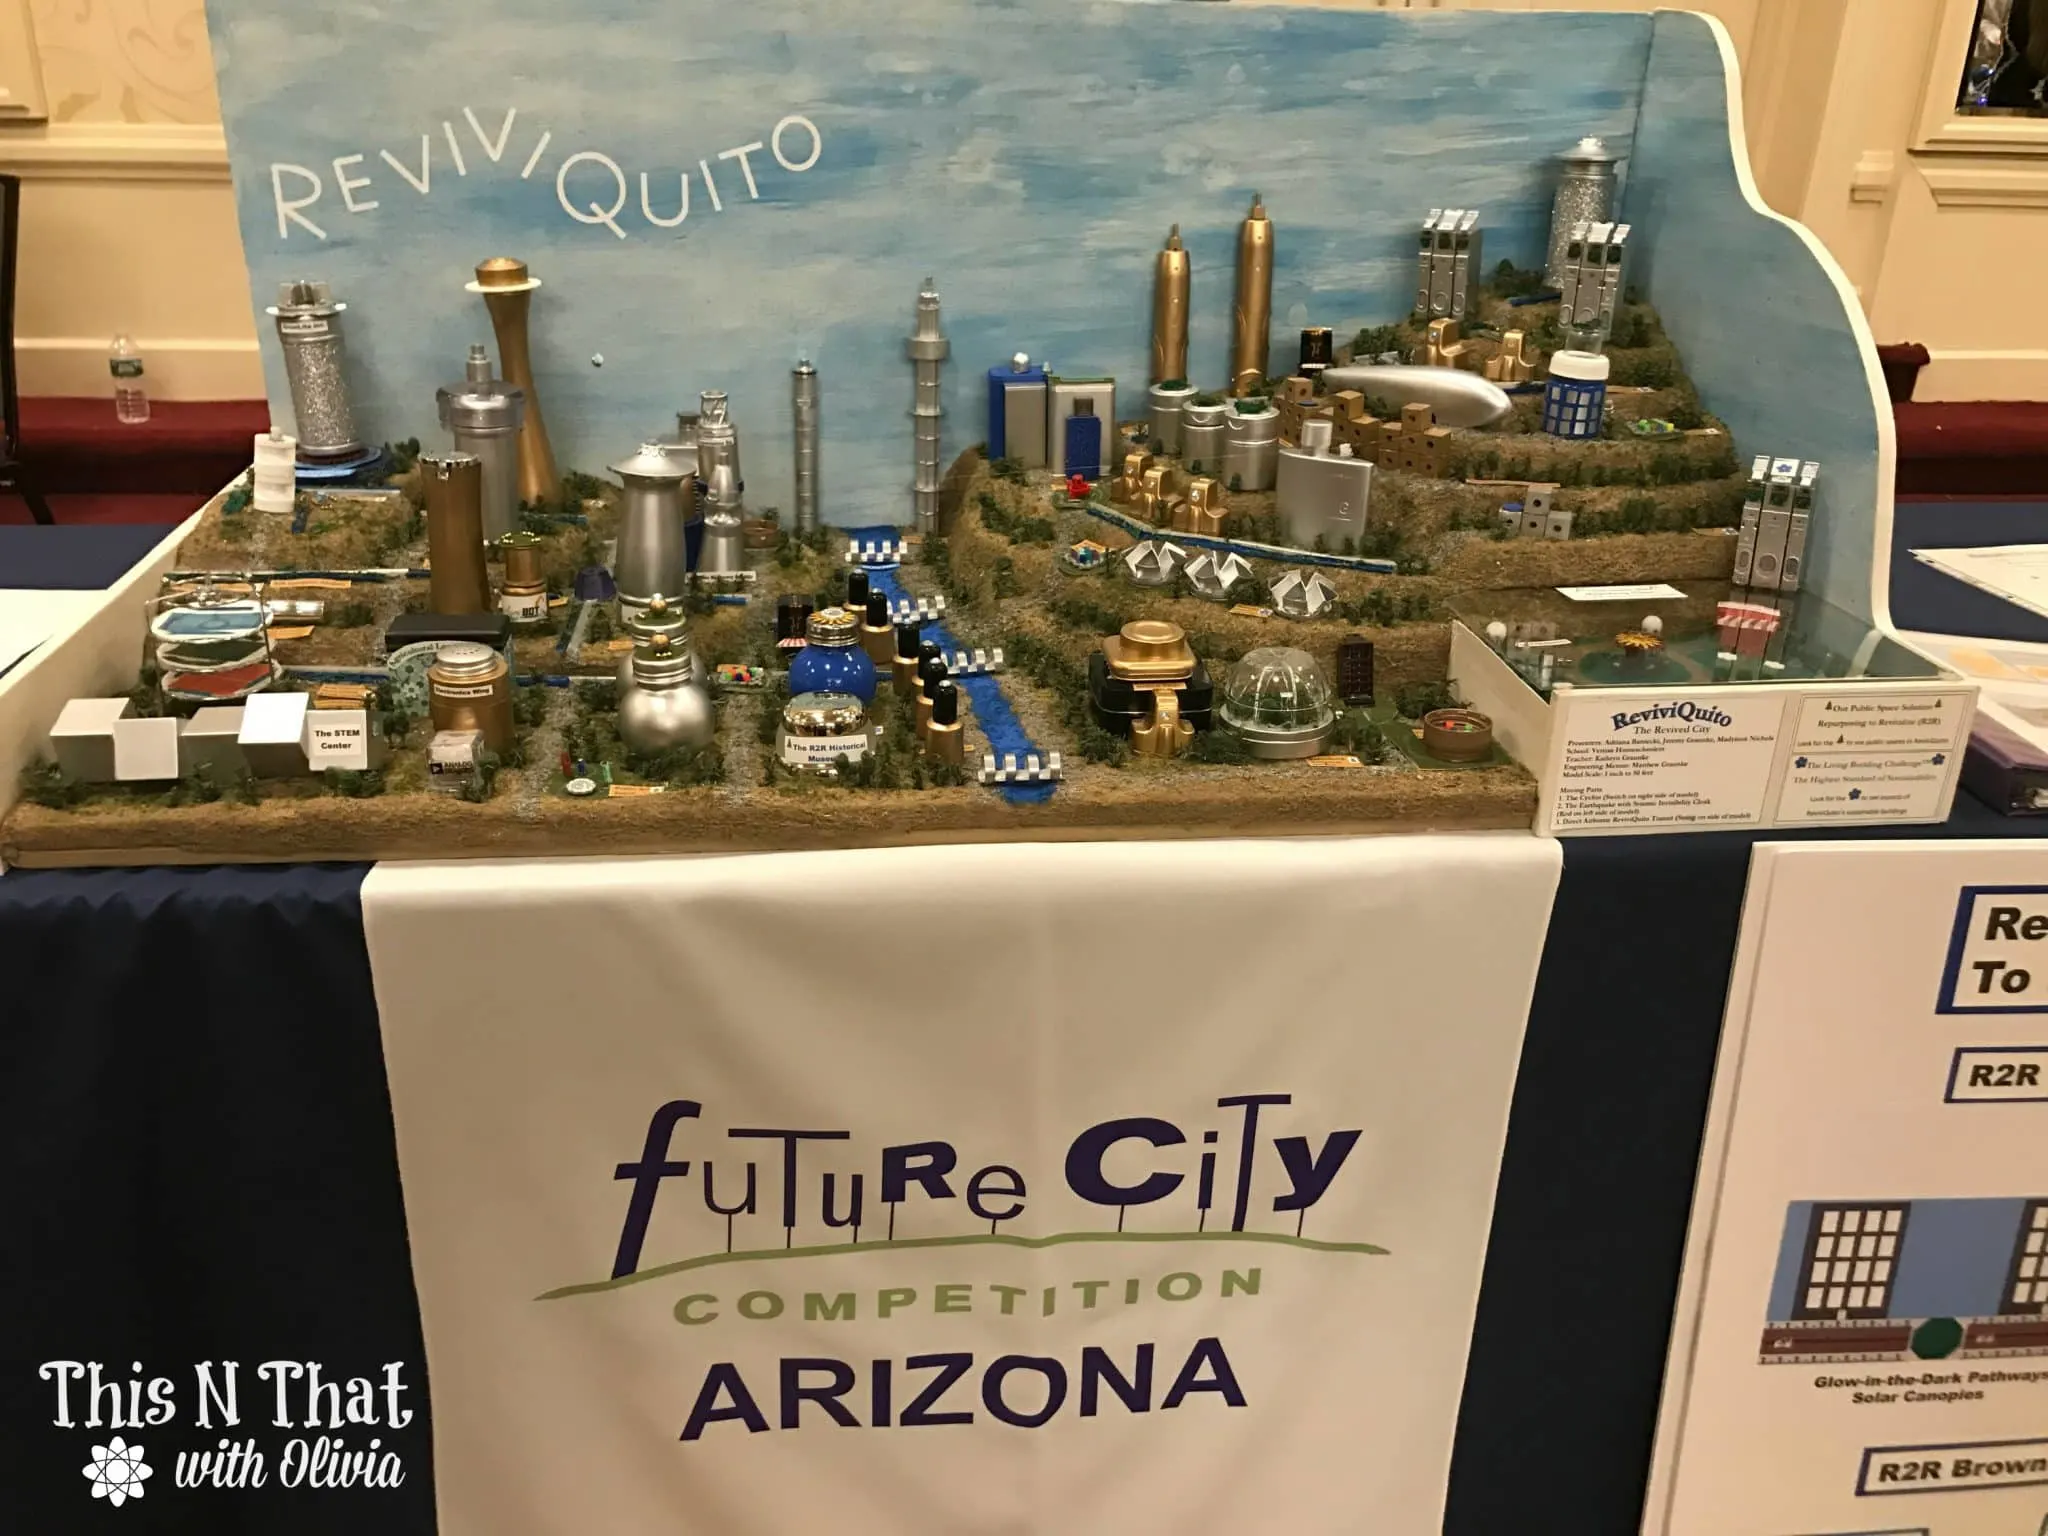 Future City Competition Live in D.C. #FutureCity25 #ad @DiscoverEOrg